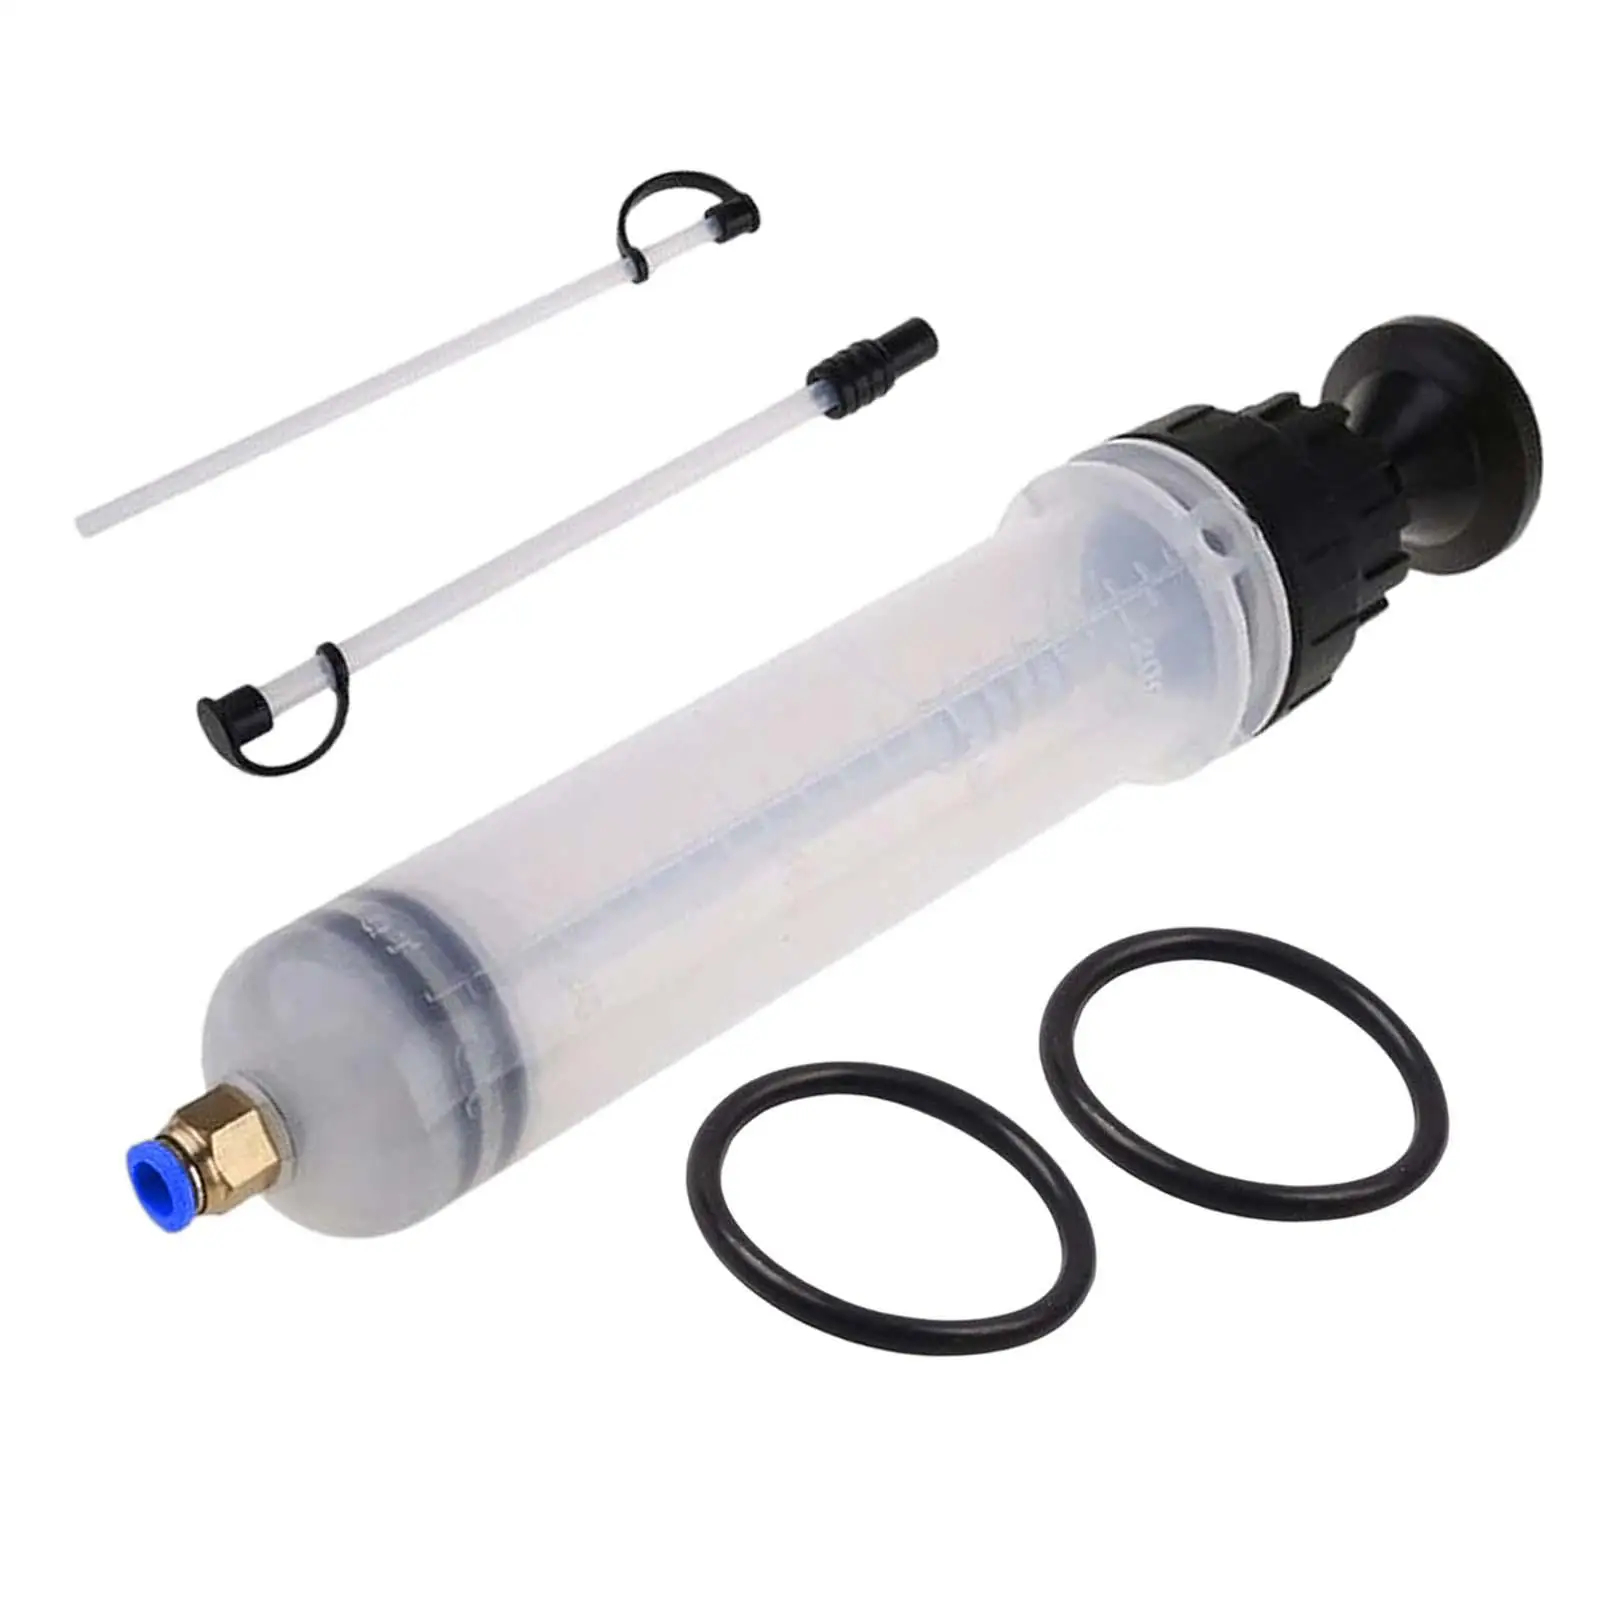 Auto Brake Fluid Extractor, 500cc Universal for Vehicles ATV Boats Motorcycle